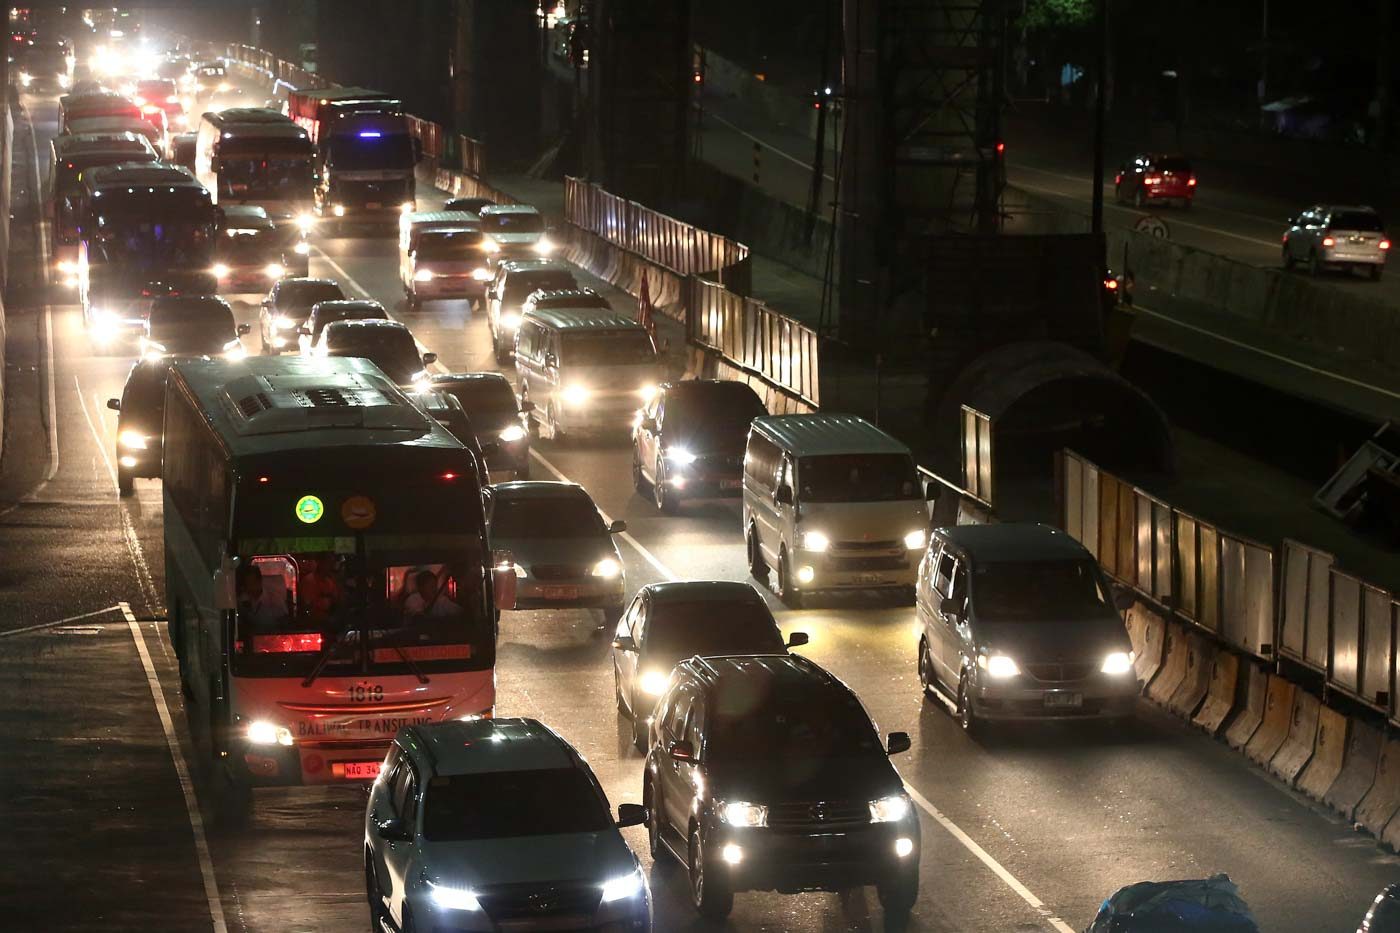 LTFRB threatens to revoke permits of overcharging ride-hailing firms